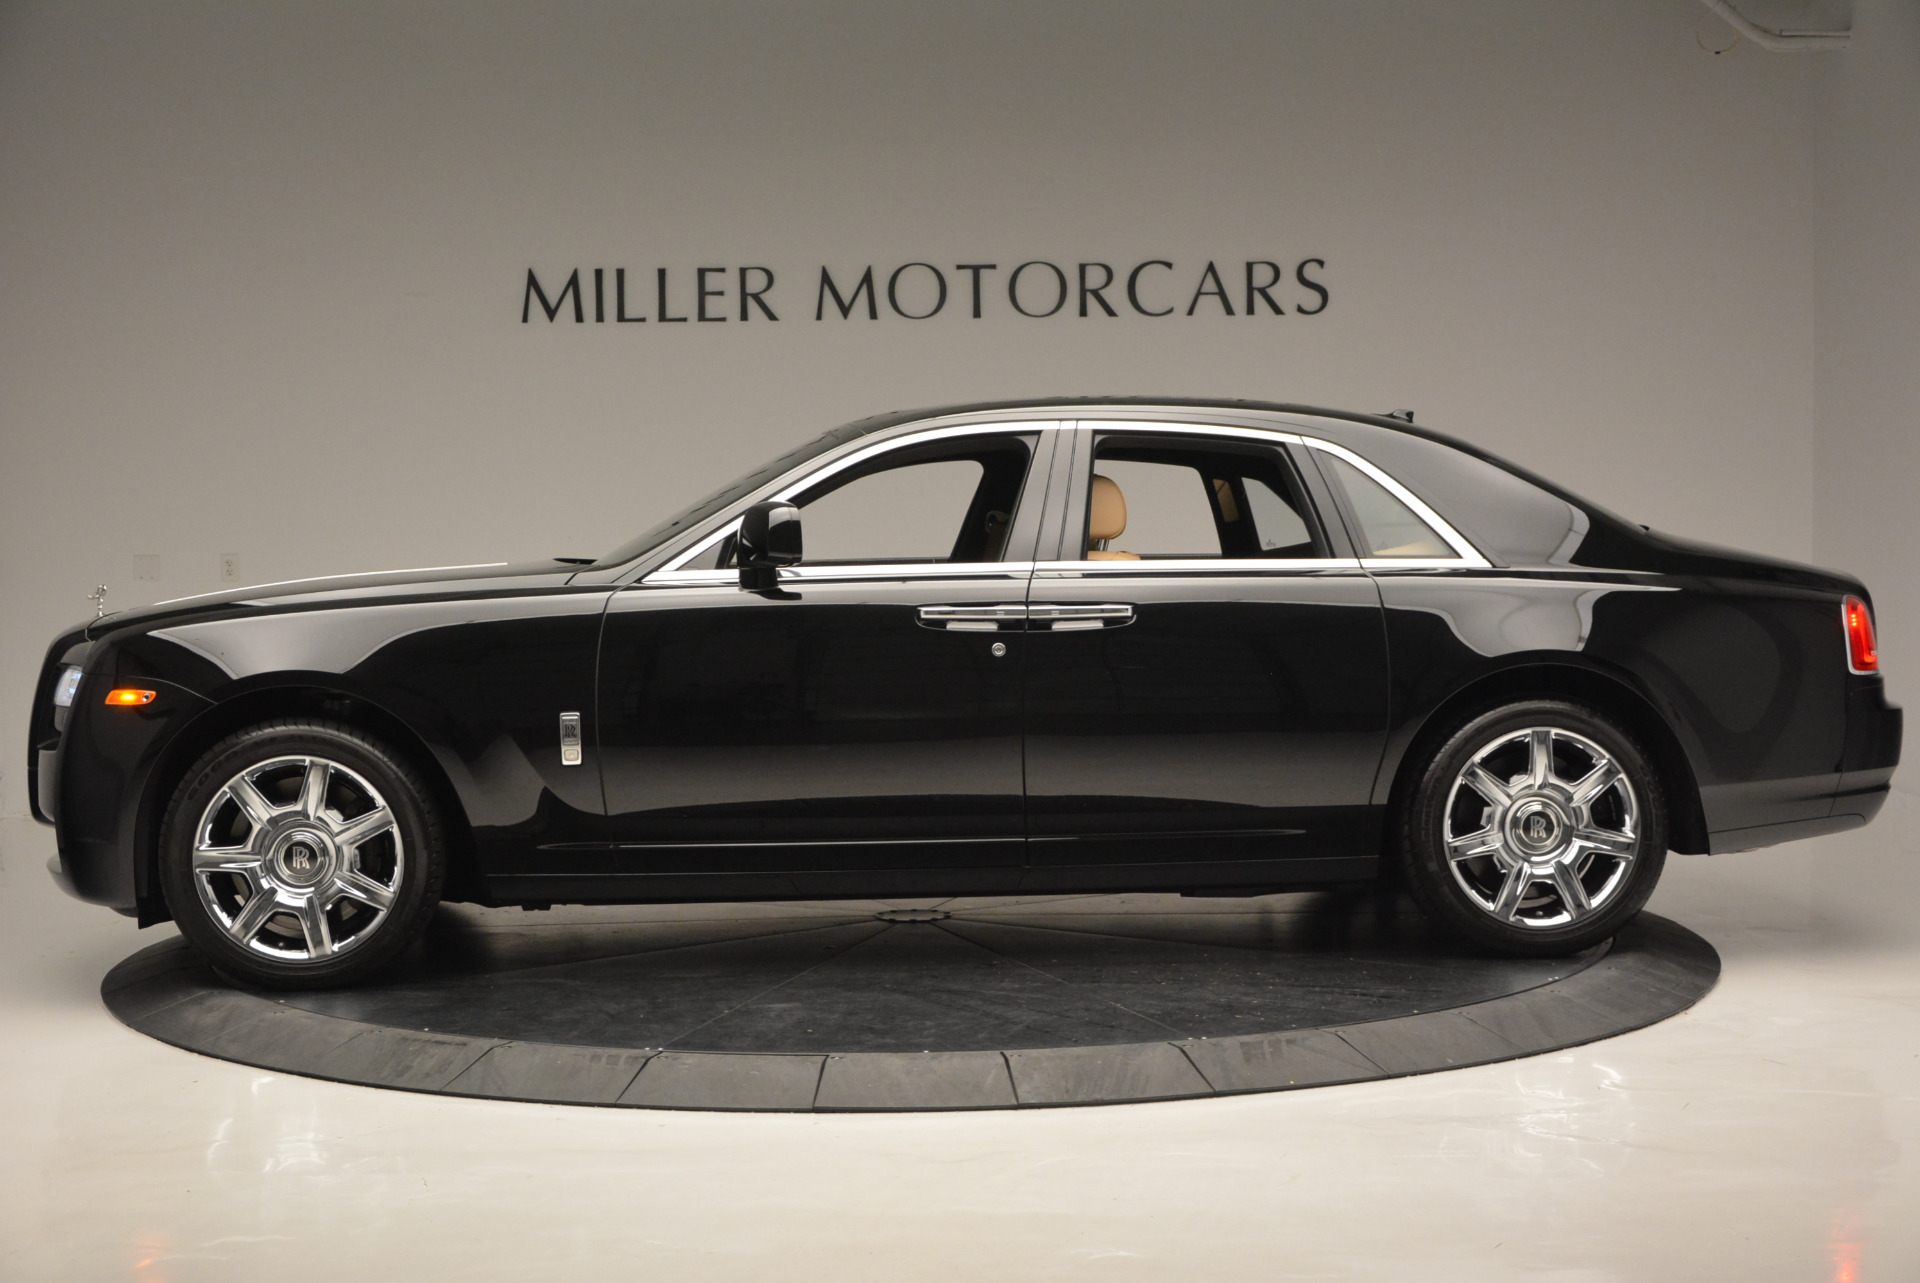 PreOwned 2011 RollsRoyce Ghost For Sale   Miller Motorcars Stock R620A